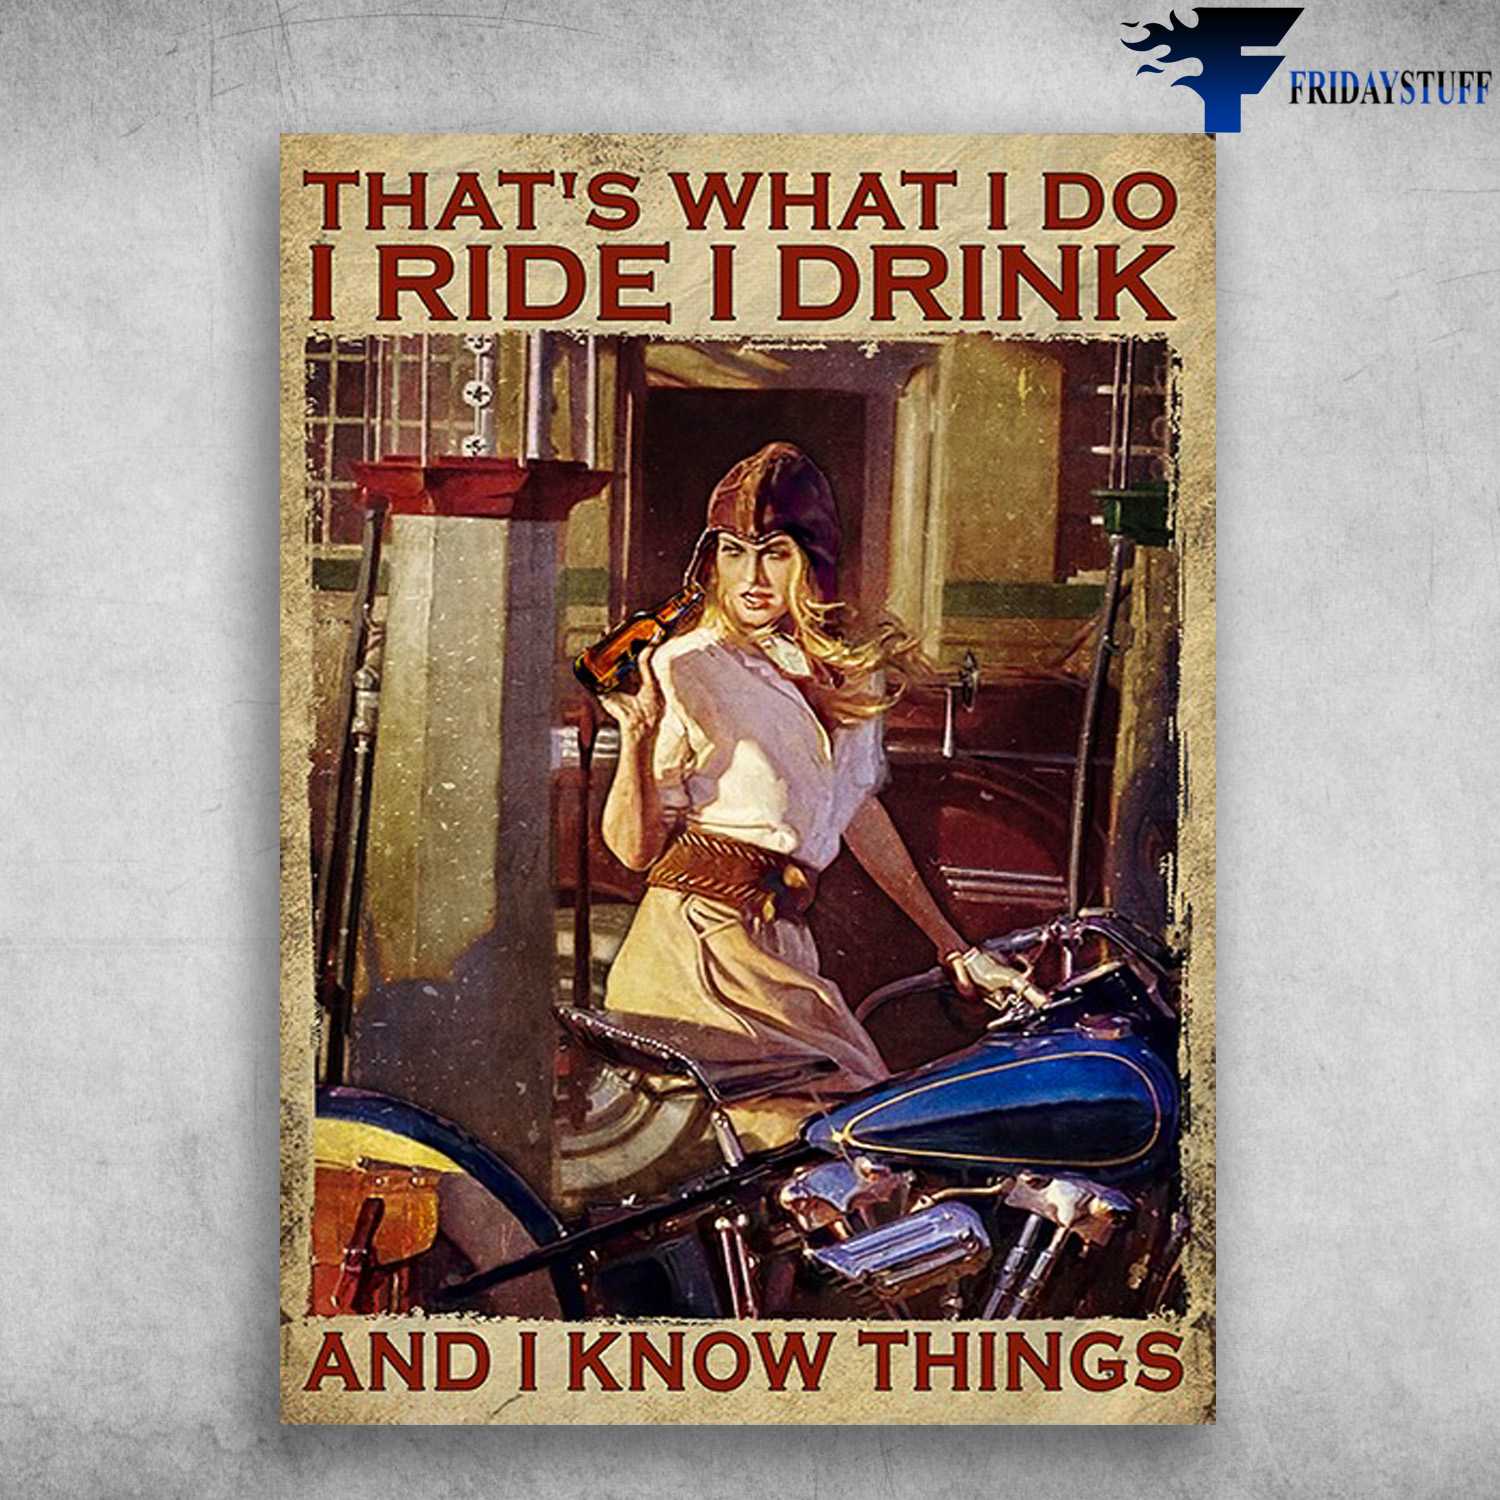 Lady Motorcycle, Riding With Beer - That's What I Do, I Ride, I Drink, And I Know Things